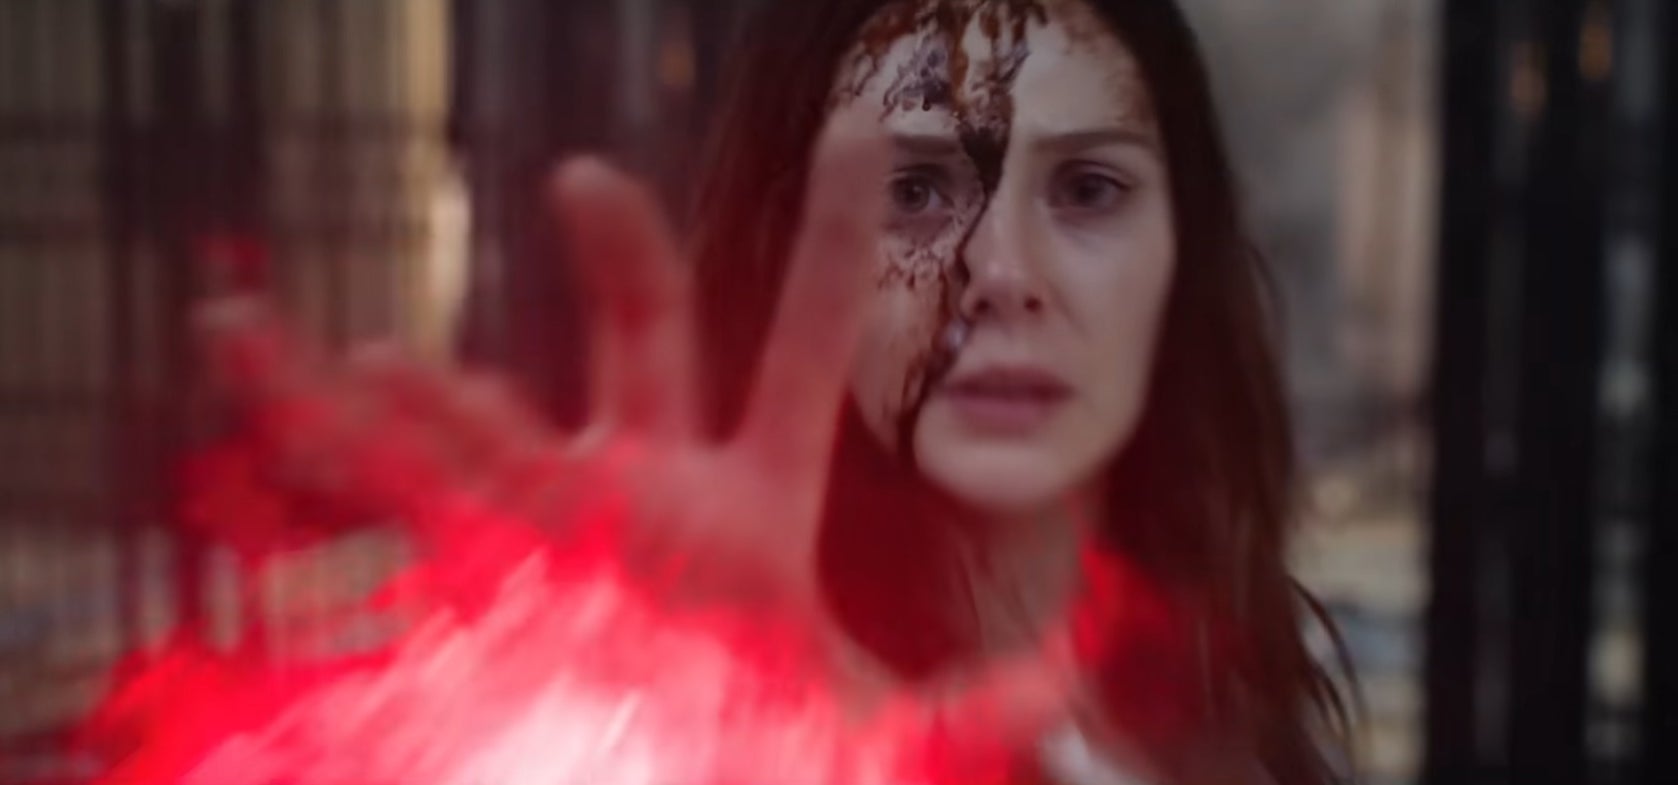 Wanda using magic with blood on her face in &quot;Doctor Strange in the Multiverse of Madness&quot;